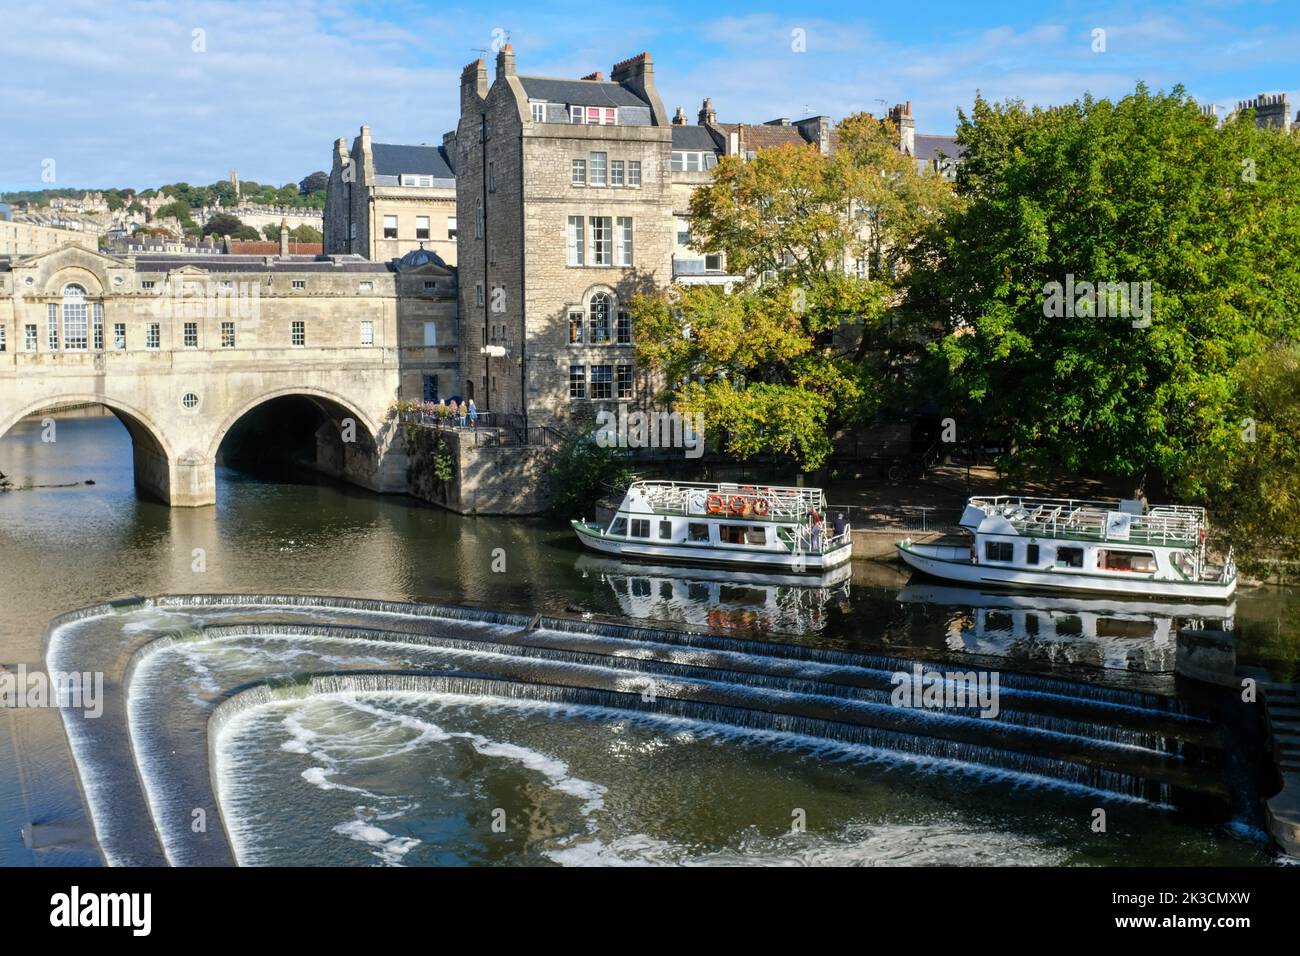 Tourist boats on the River Avon at Pulteney Weir in Bath. Stock Photo